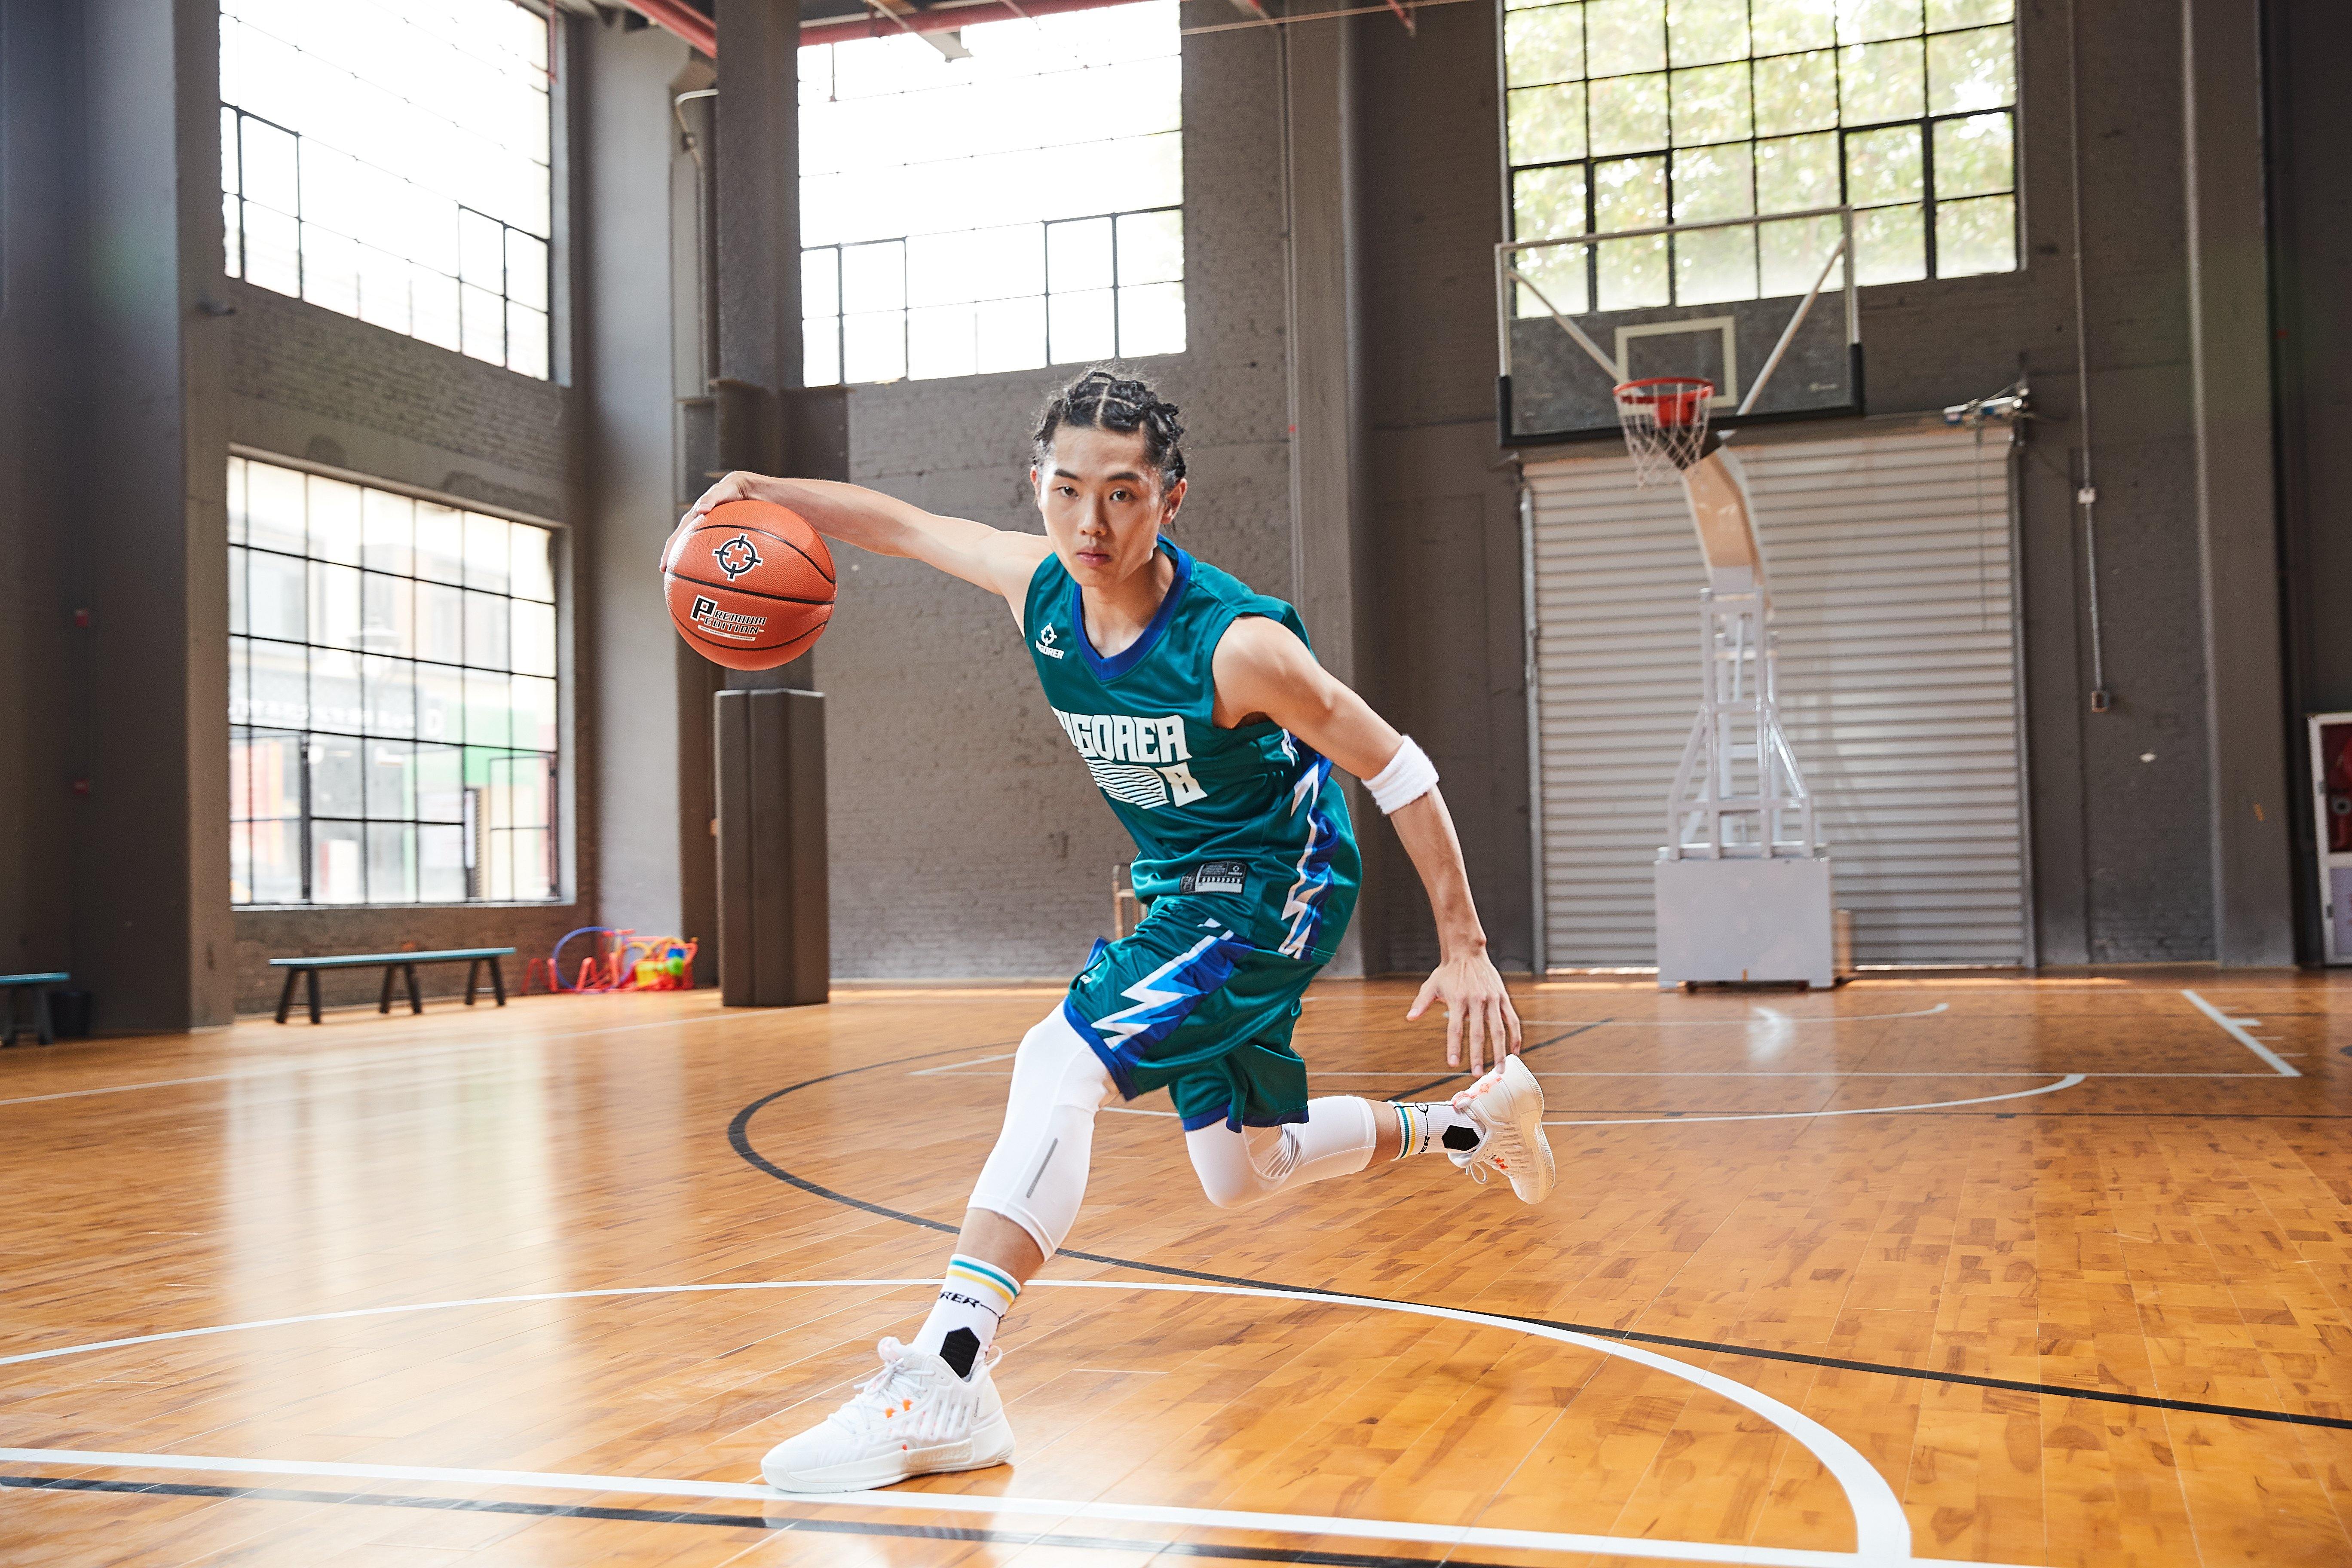 Custom Sublimation Tooth pitch series Basketball Uniform [Z118410124] -  green / XS